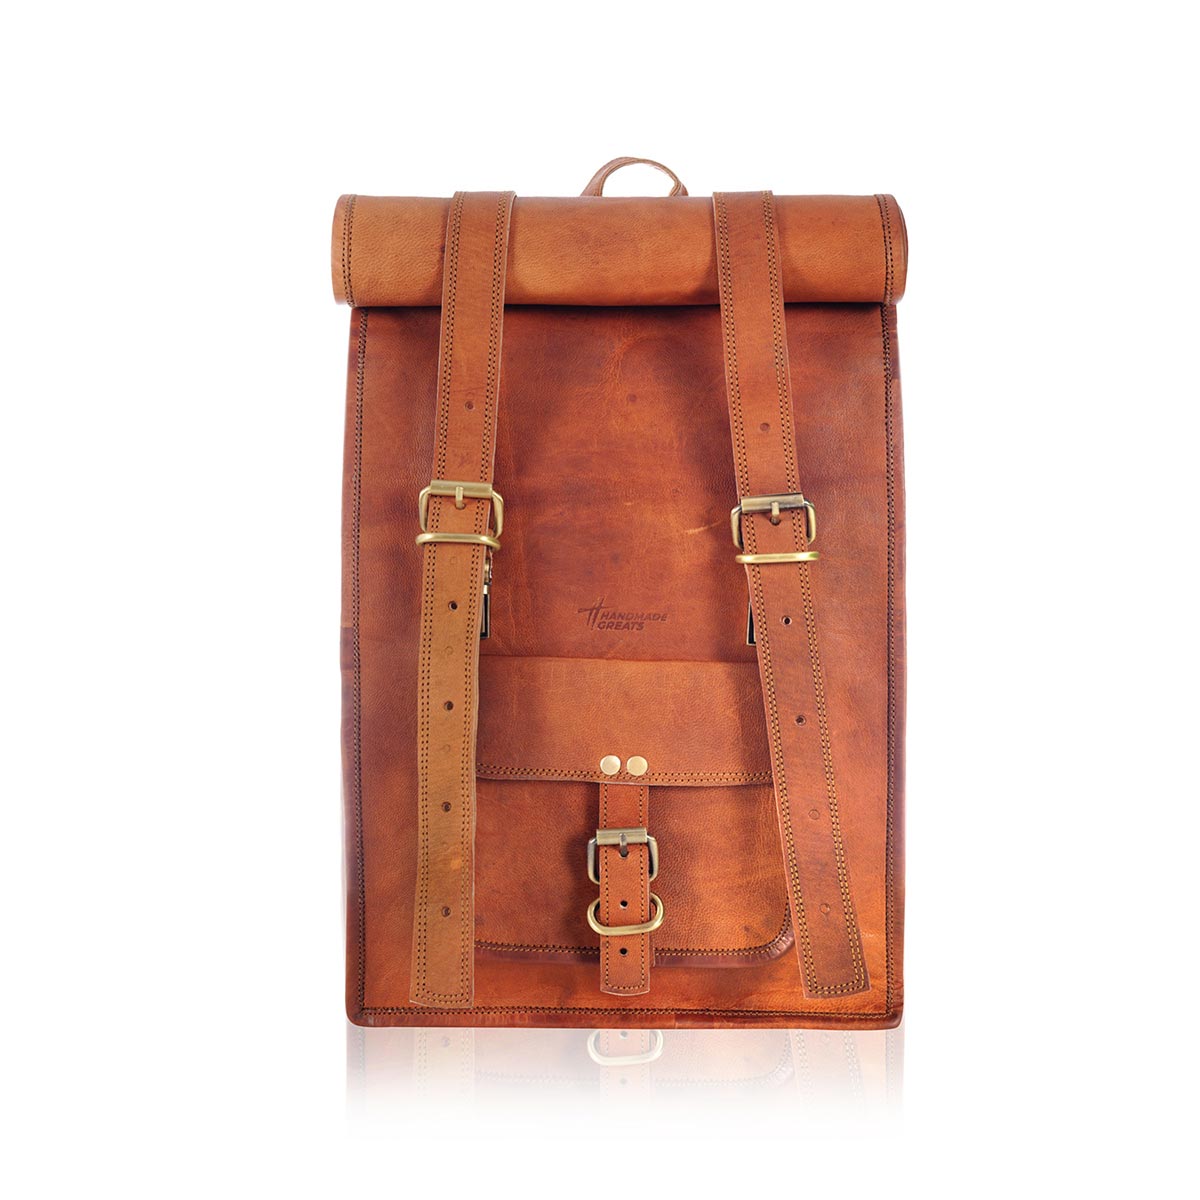 RollerKoster - Leather Roll Top Backpack